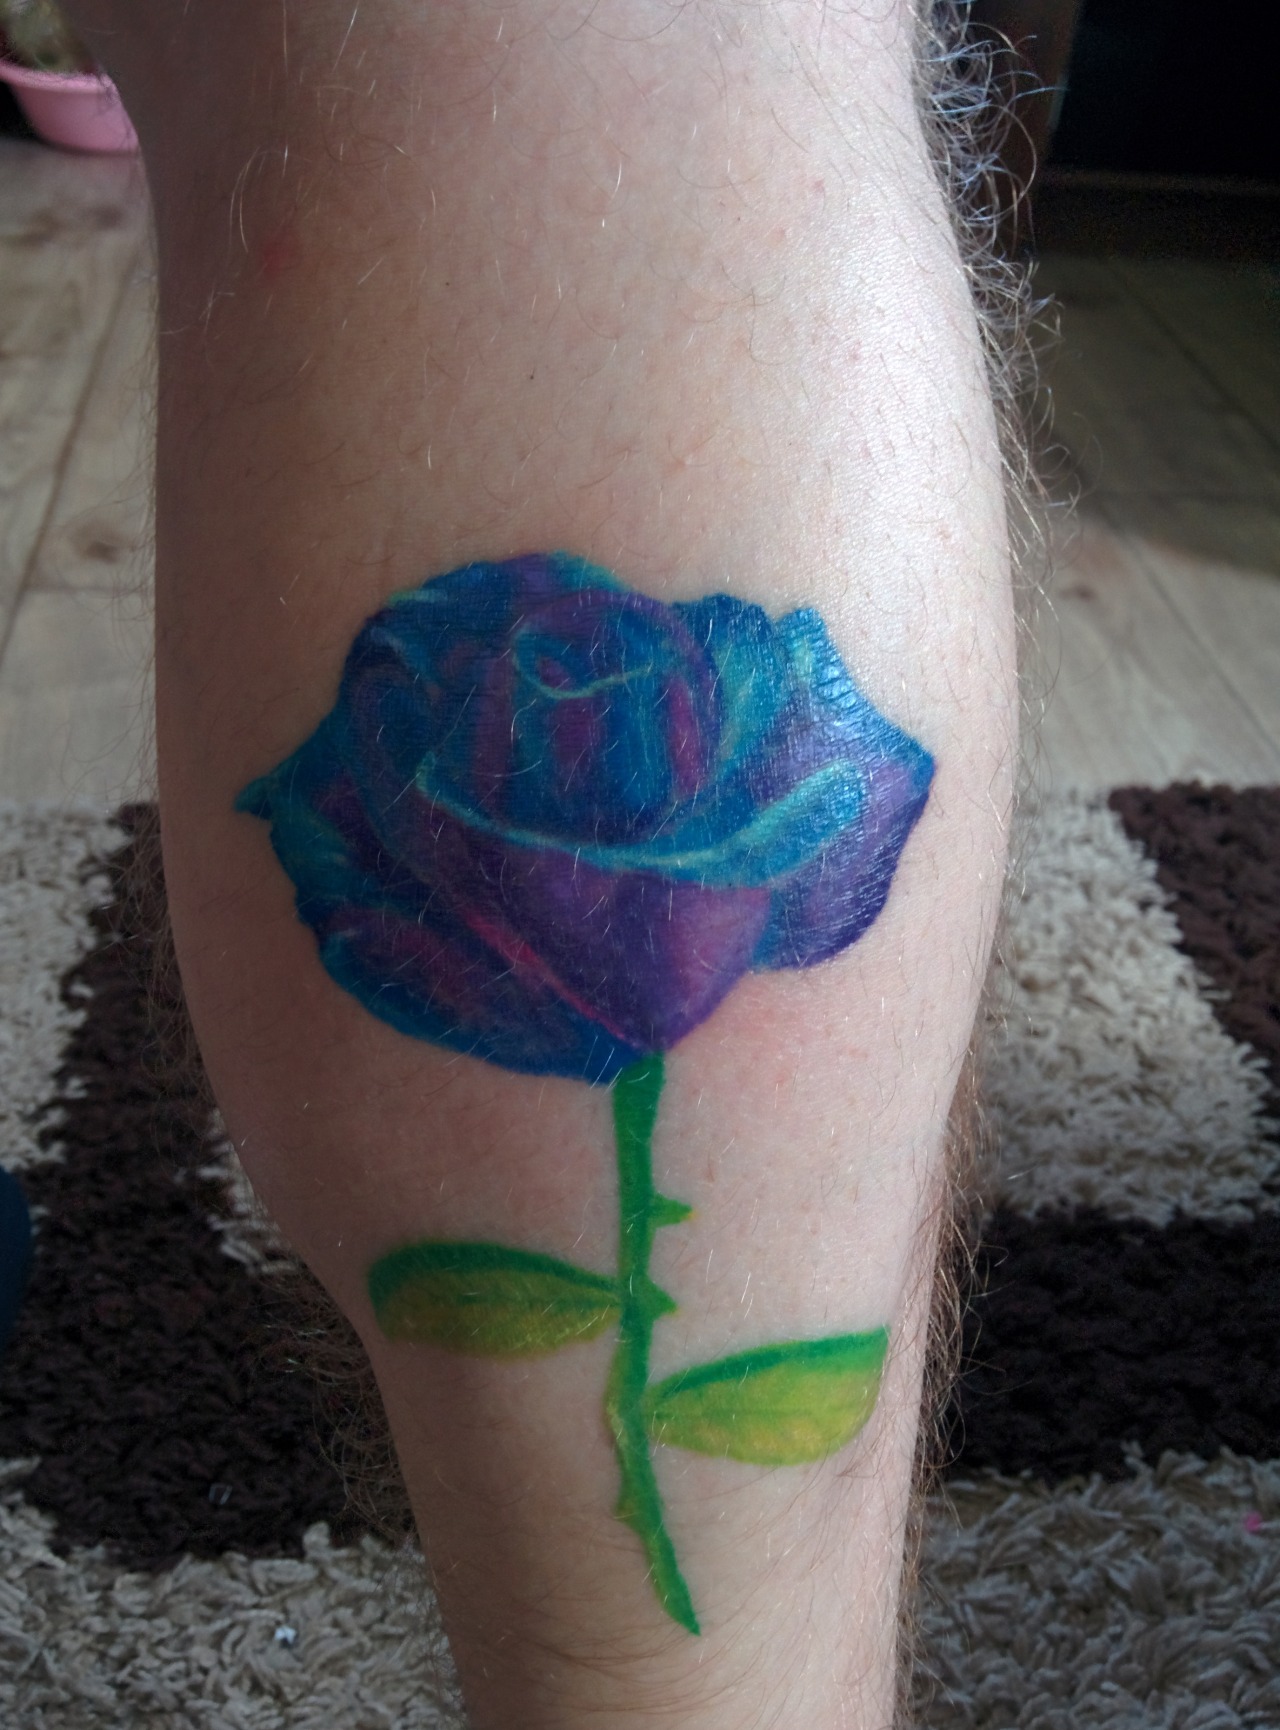 Blue rose tattoo on Marks right hand done in Tahoe at